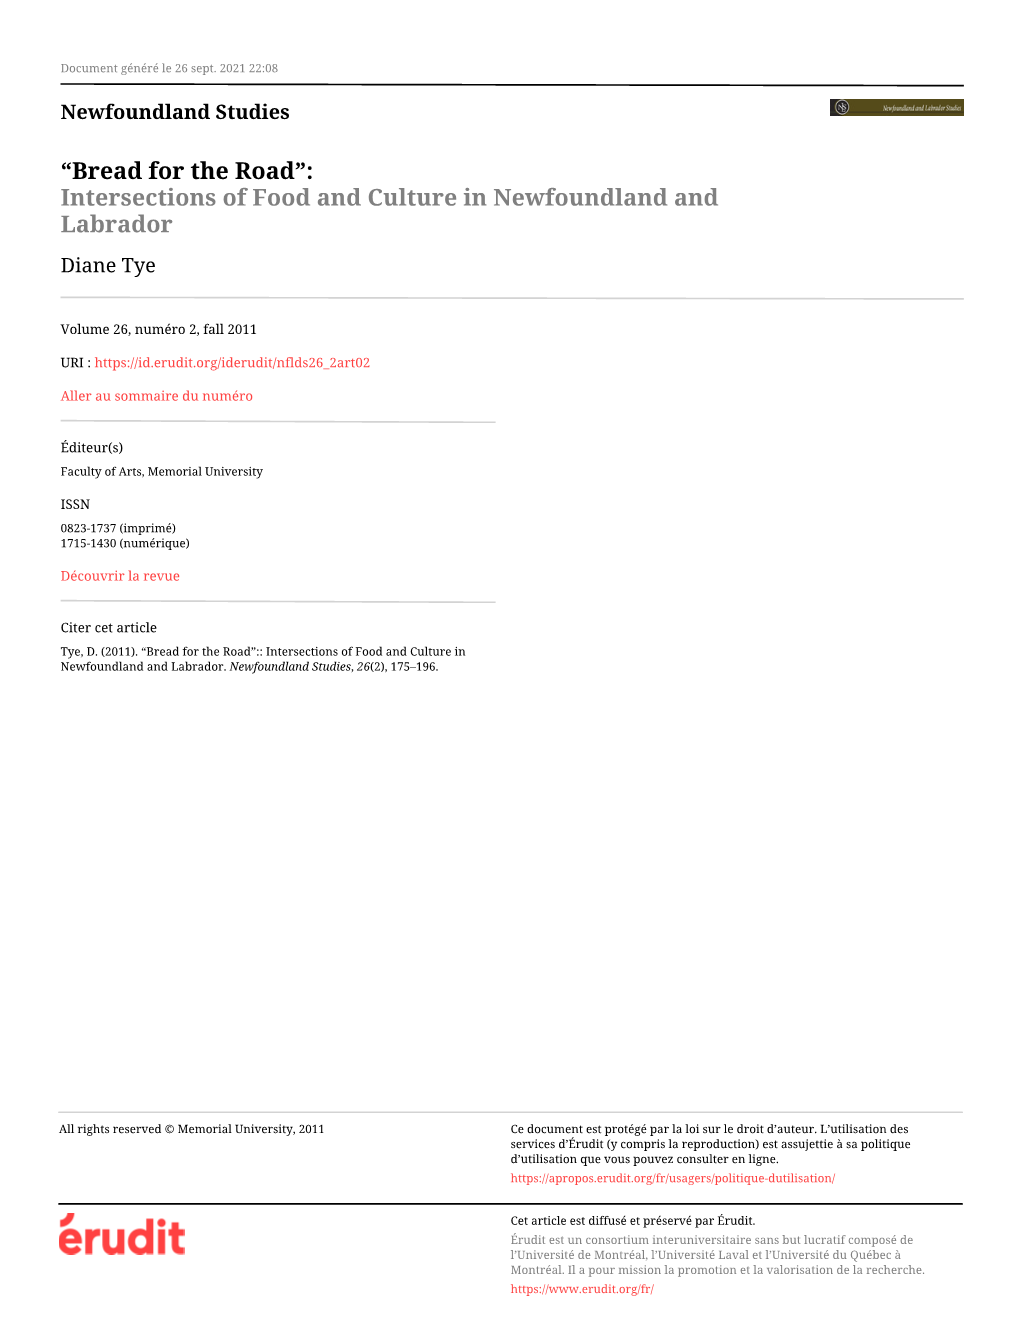 Bread for the Road”: Intersections of Food and Culture in Newfoundland and Labrador Diane Tye